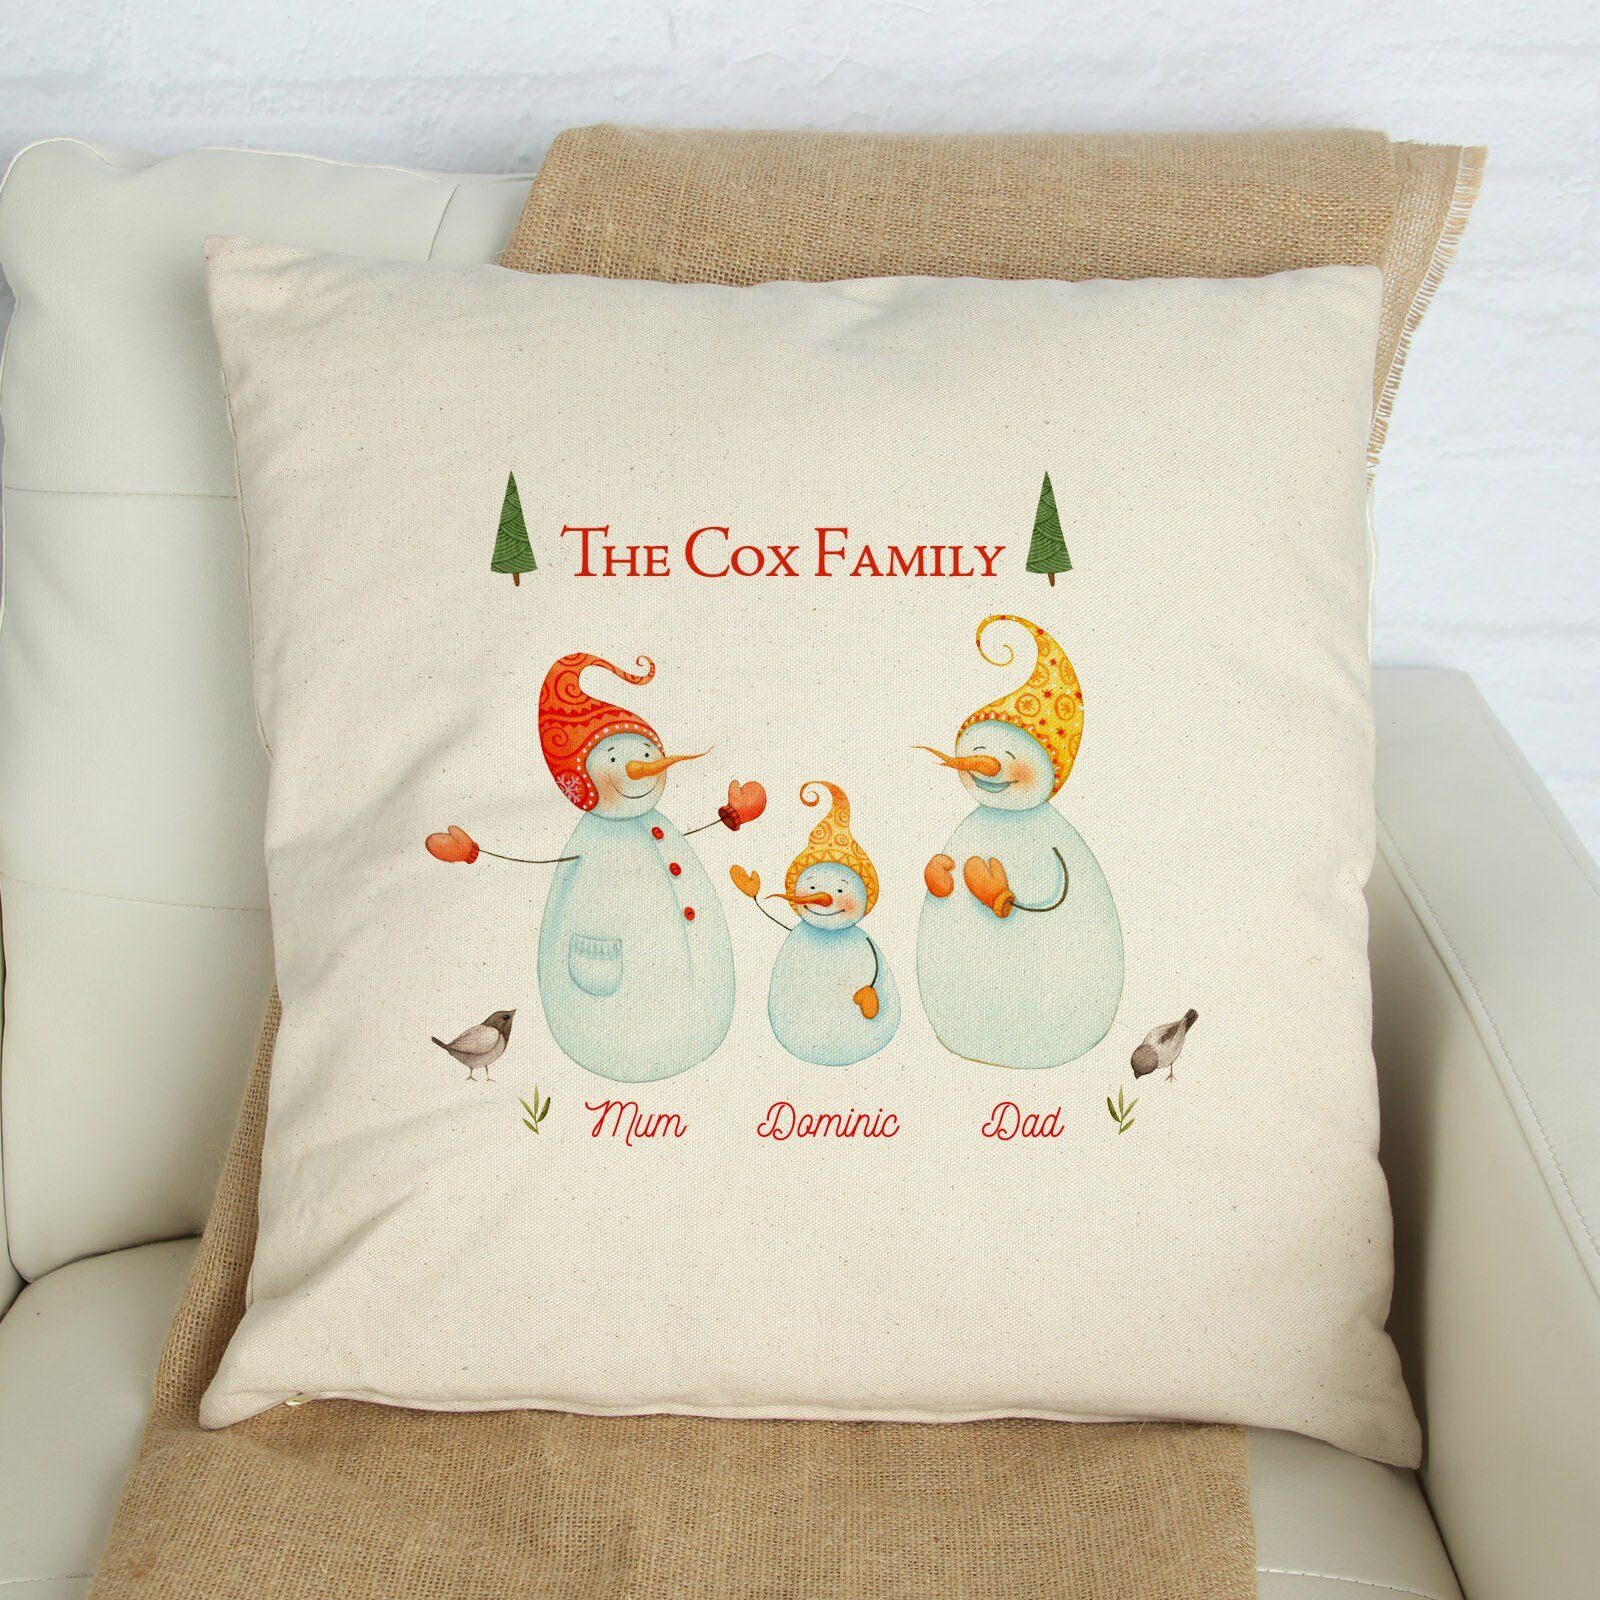 Snowman family portrait, Personalised Christmas cushion cover with the last name and names